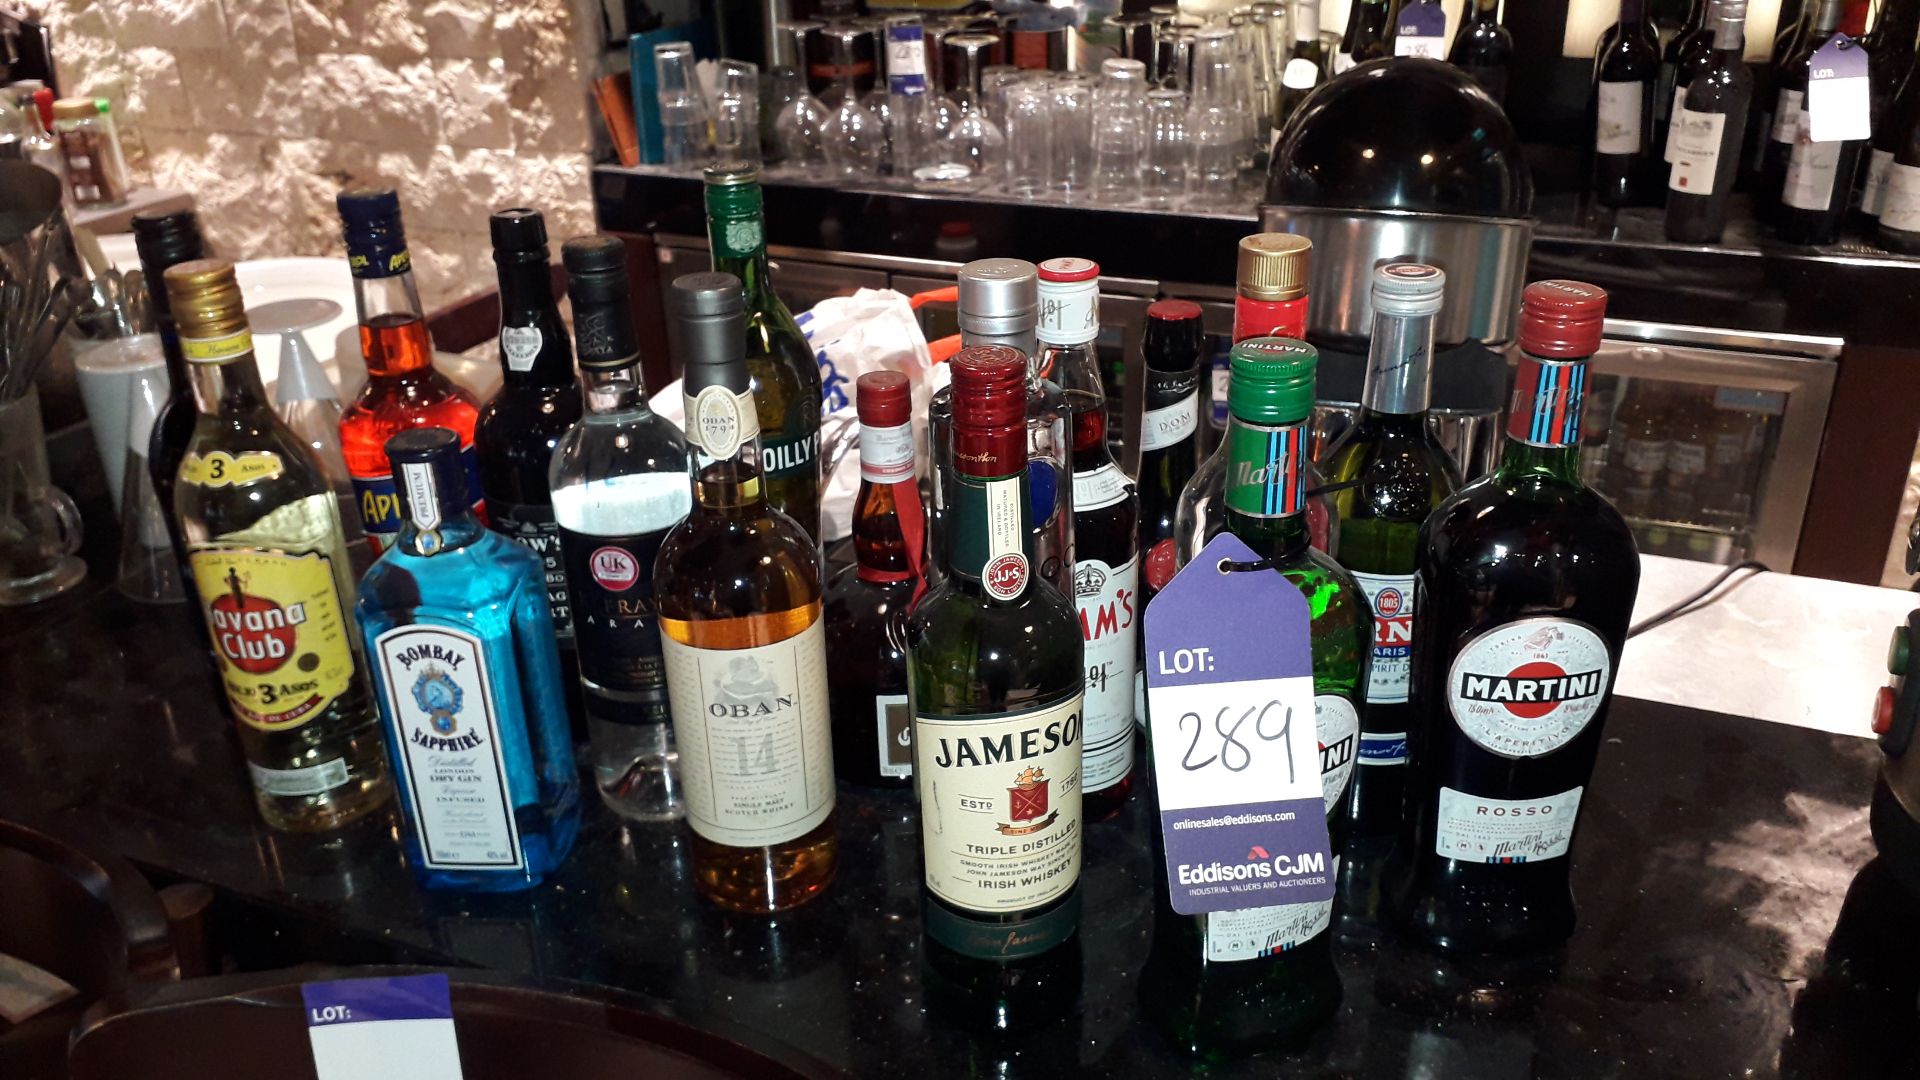 Selection of Spirits to include Unopened Bottles of: Martini Rosso, Pernod, Benedictine, Stolichnaga